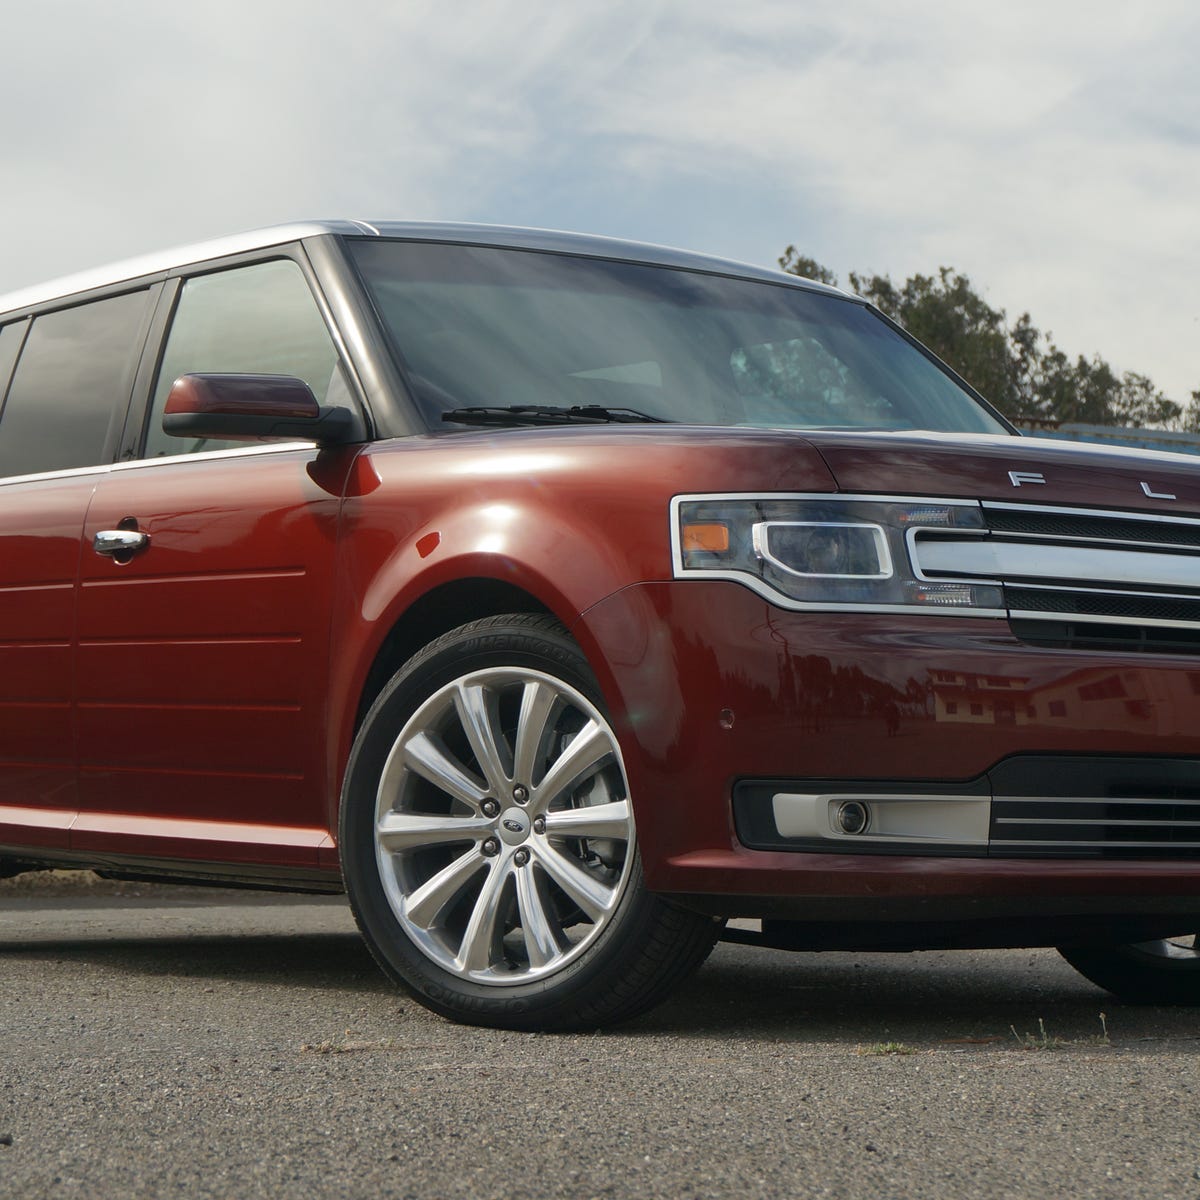 2015 Ford Flex Limited Ecoboost review: The missing link: Ford's  genre-bending Flex starts to show its age - CNET